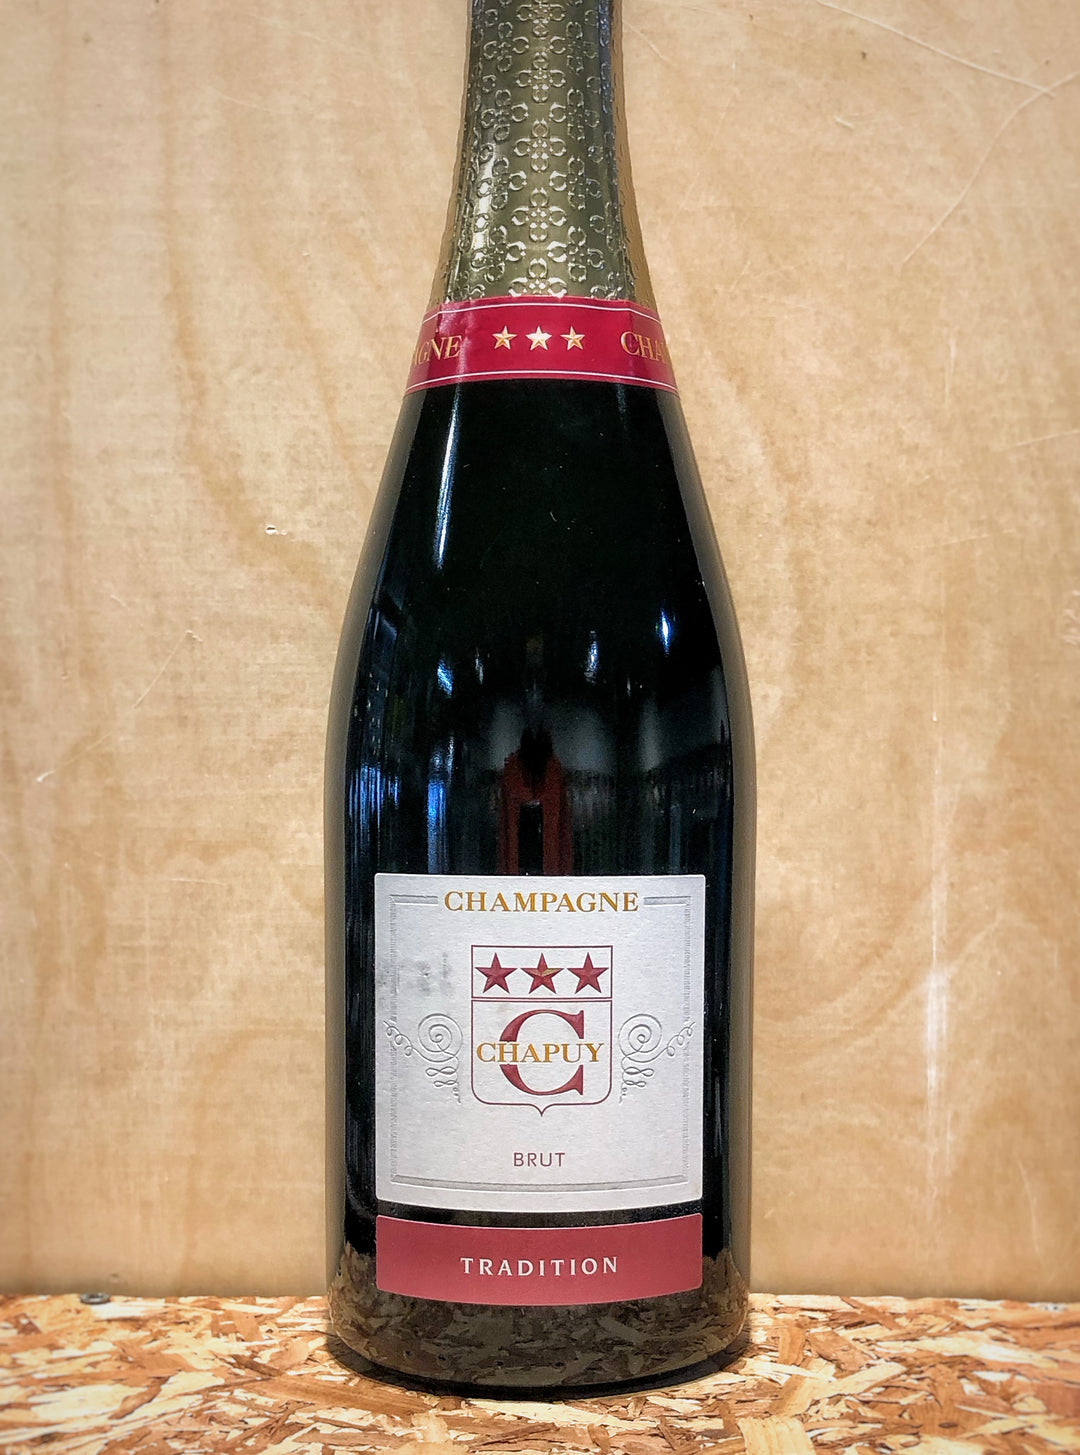 Domaine Chapuy Champagne Brut Tradition NV (Champagne, France)